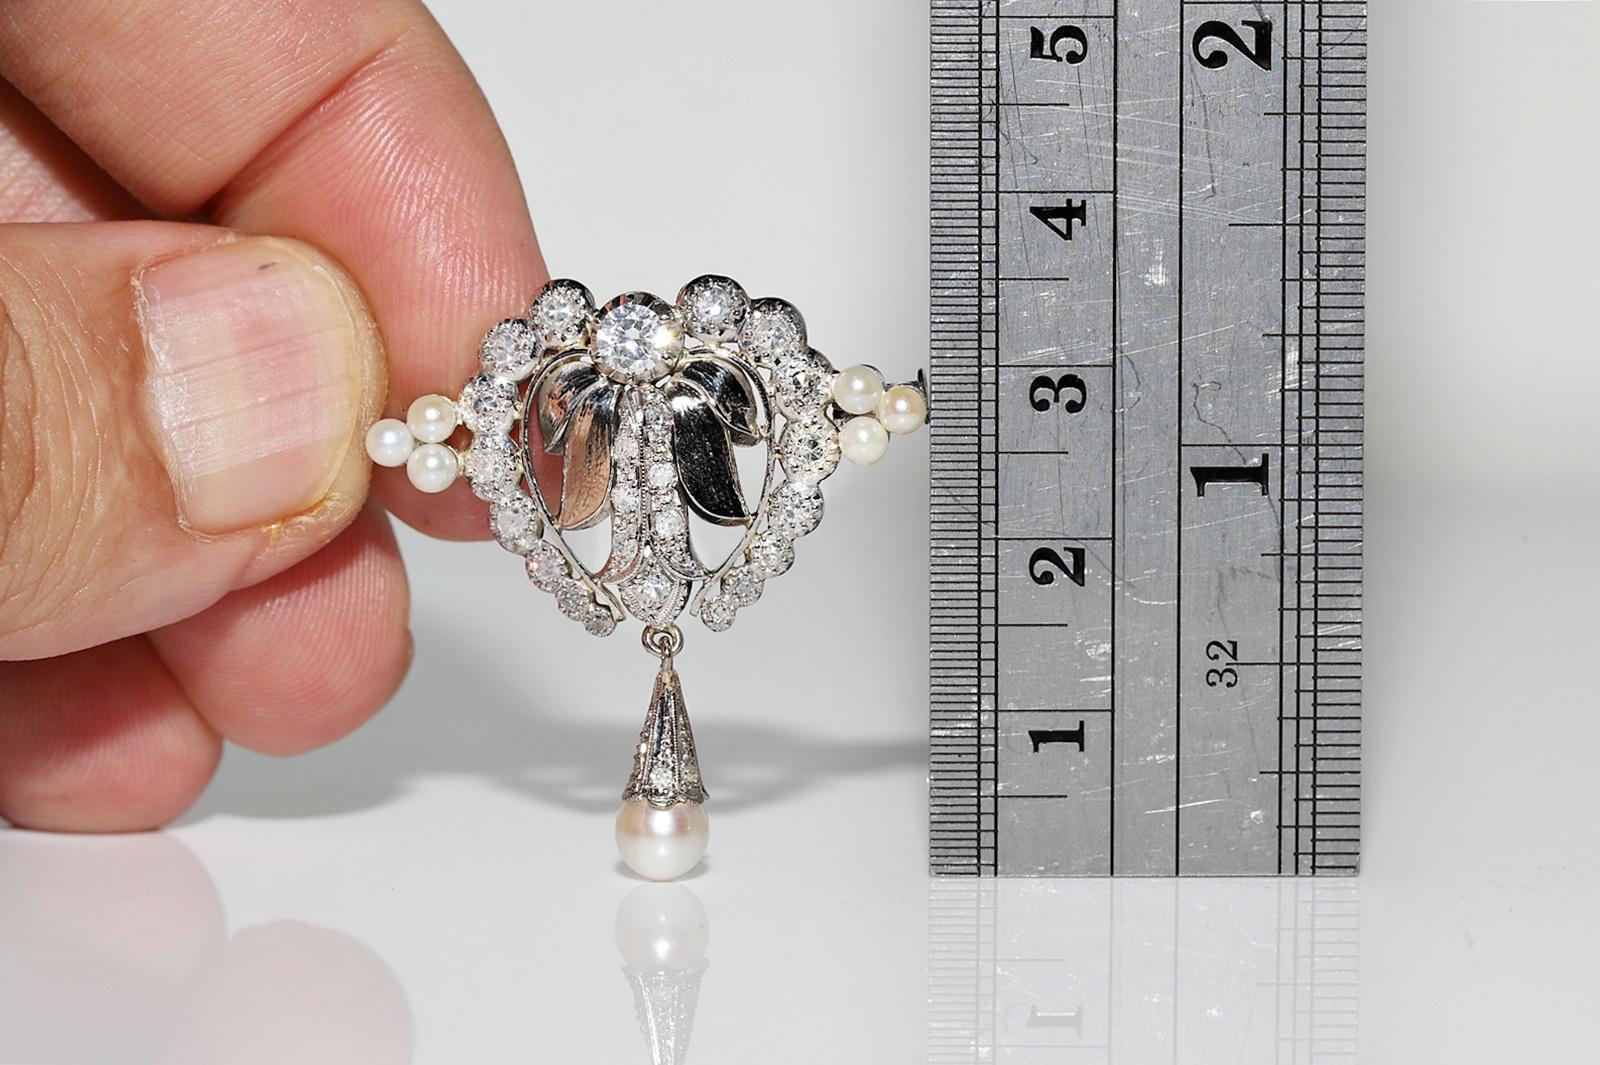 In very good condition.
Total weight is 7 grams.
Totally is diamond 1.25 ct.
The diamond is has H-I-Cloudy color and vs-s1-s2-s3 clarity.
Please contact for any questions.